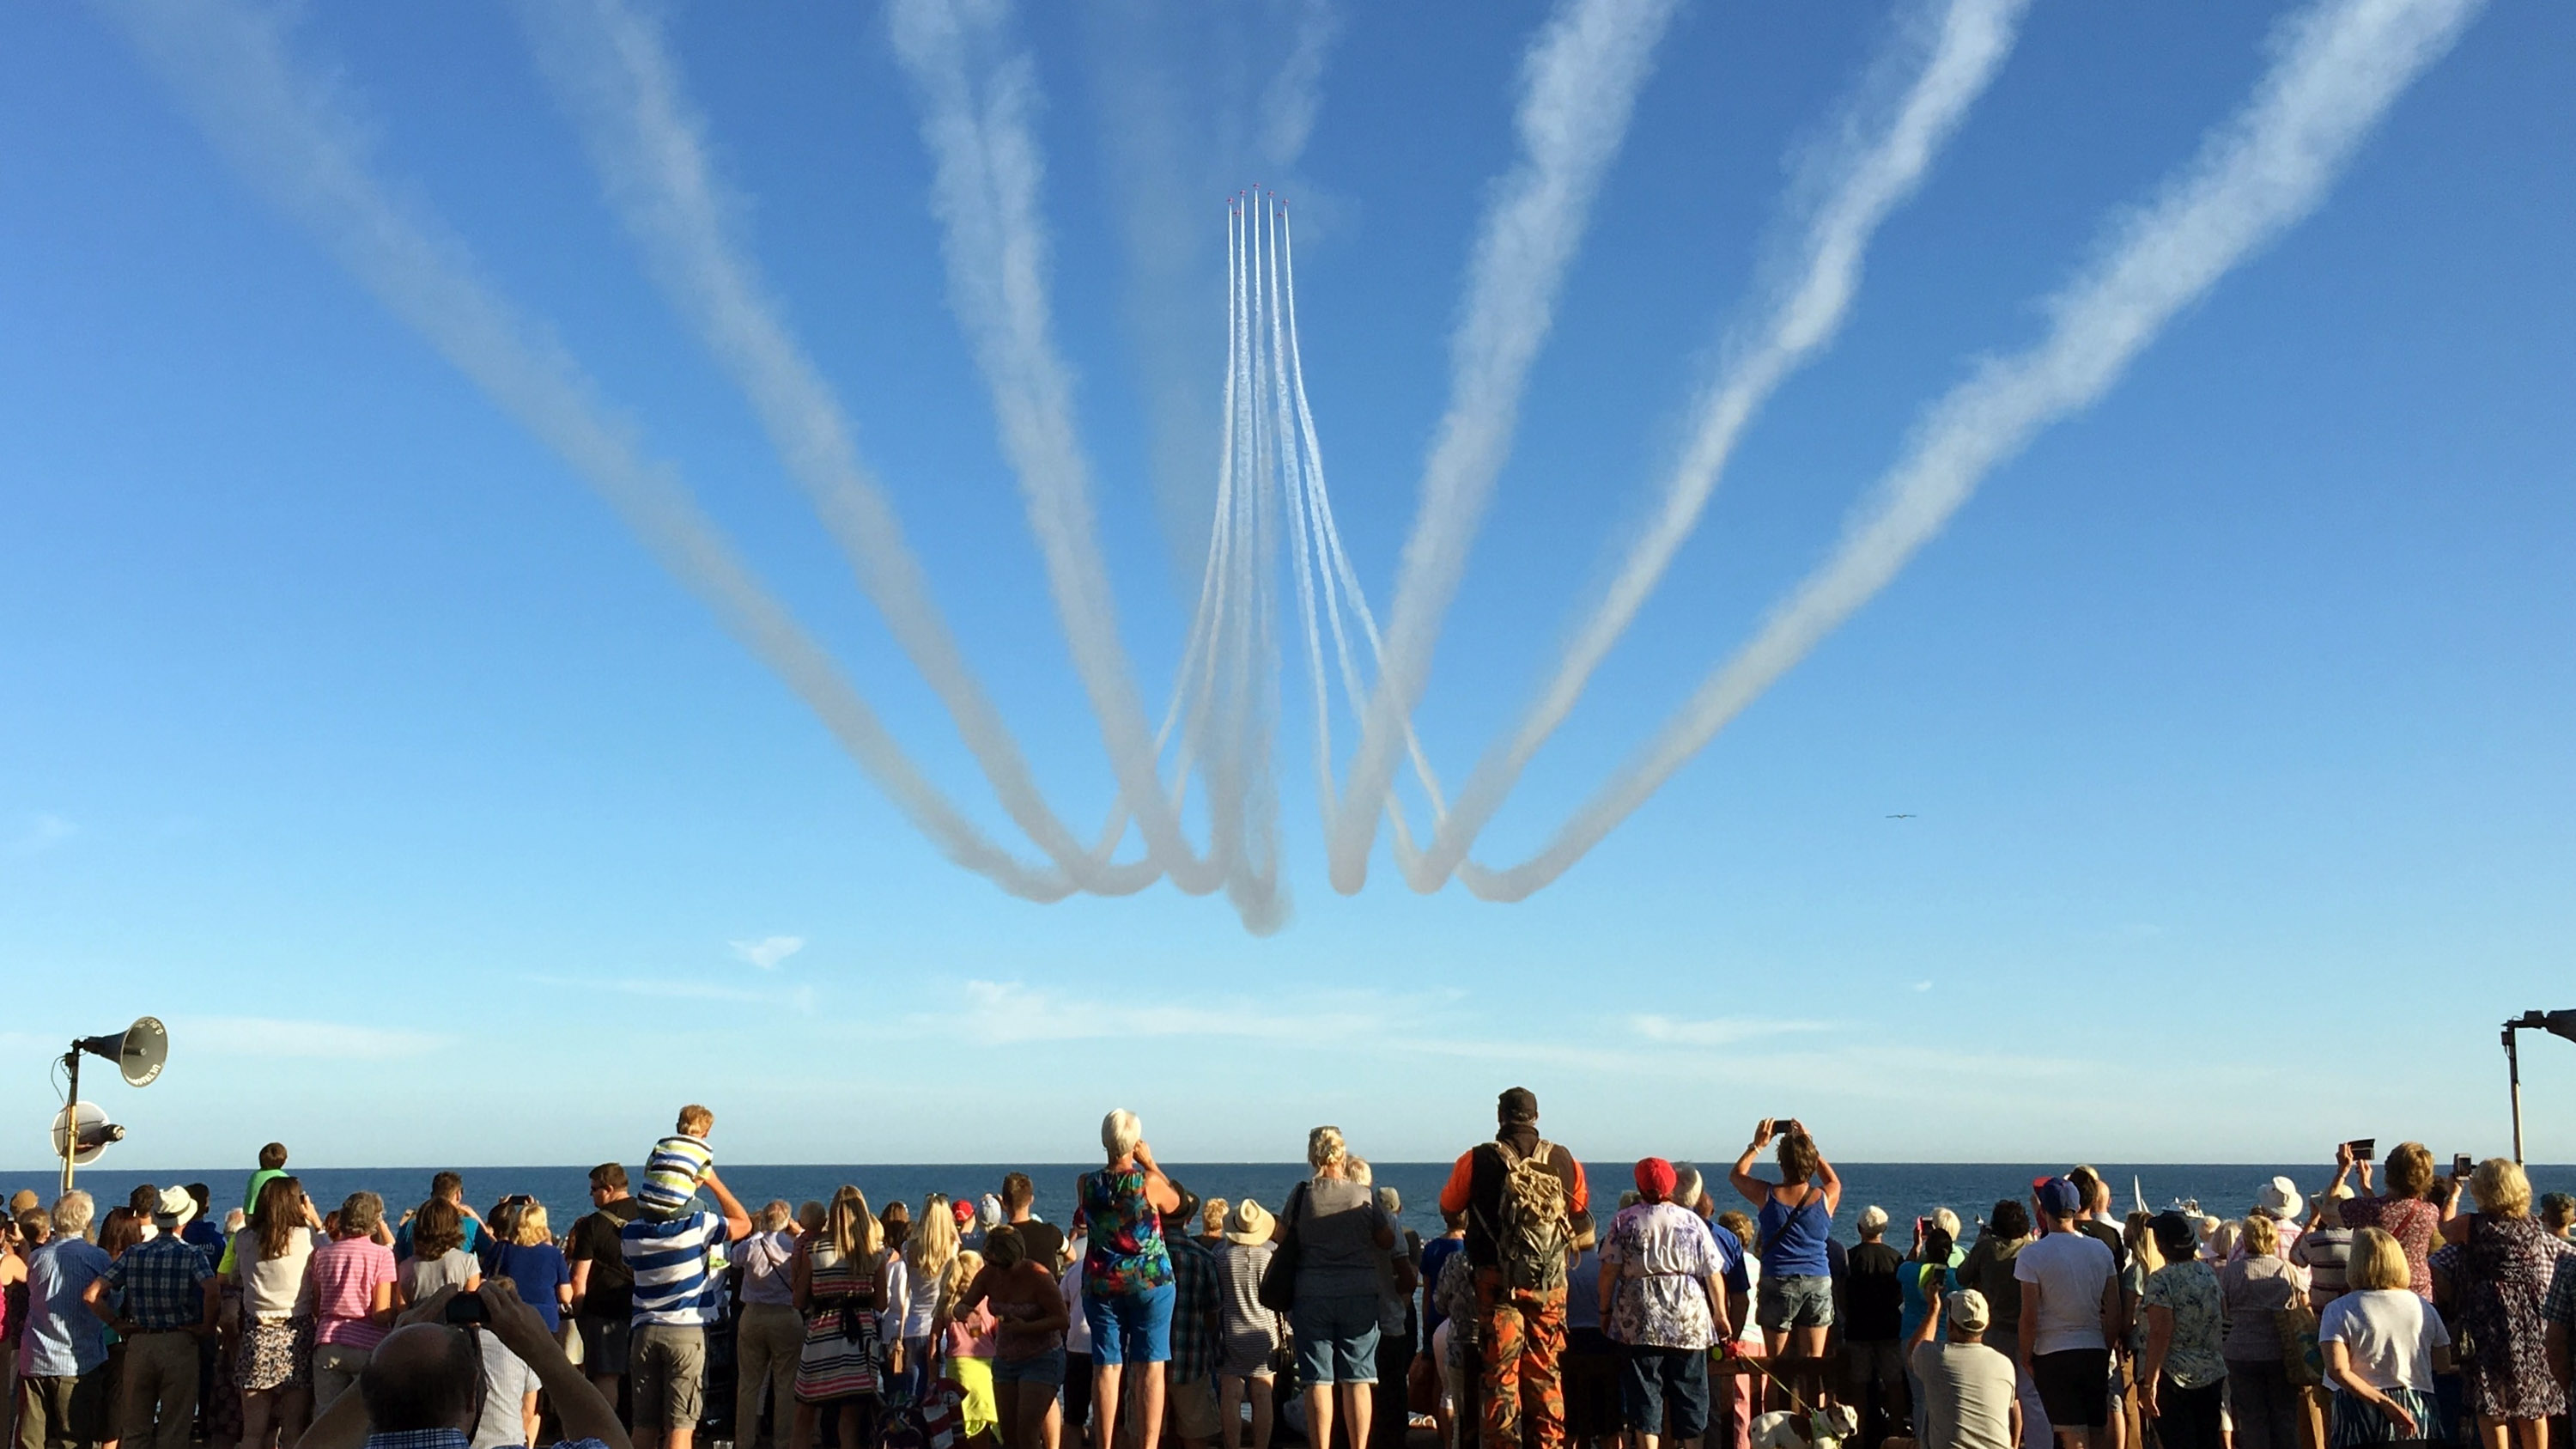 Crowd watches formation of planes flying above